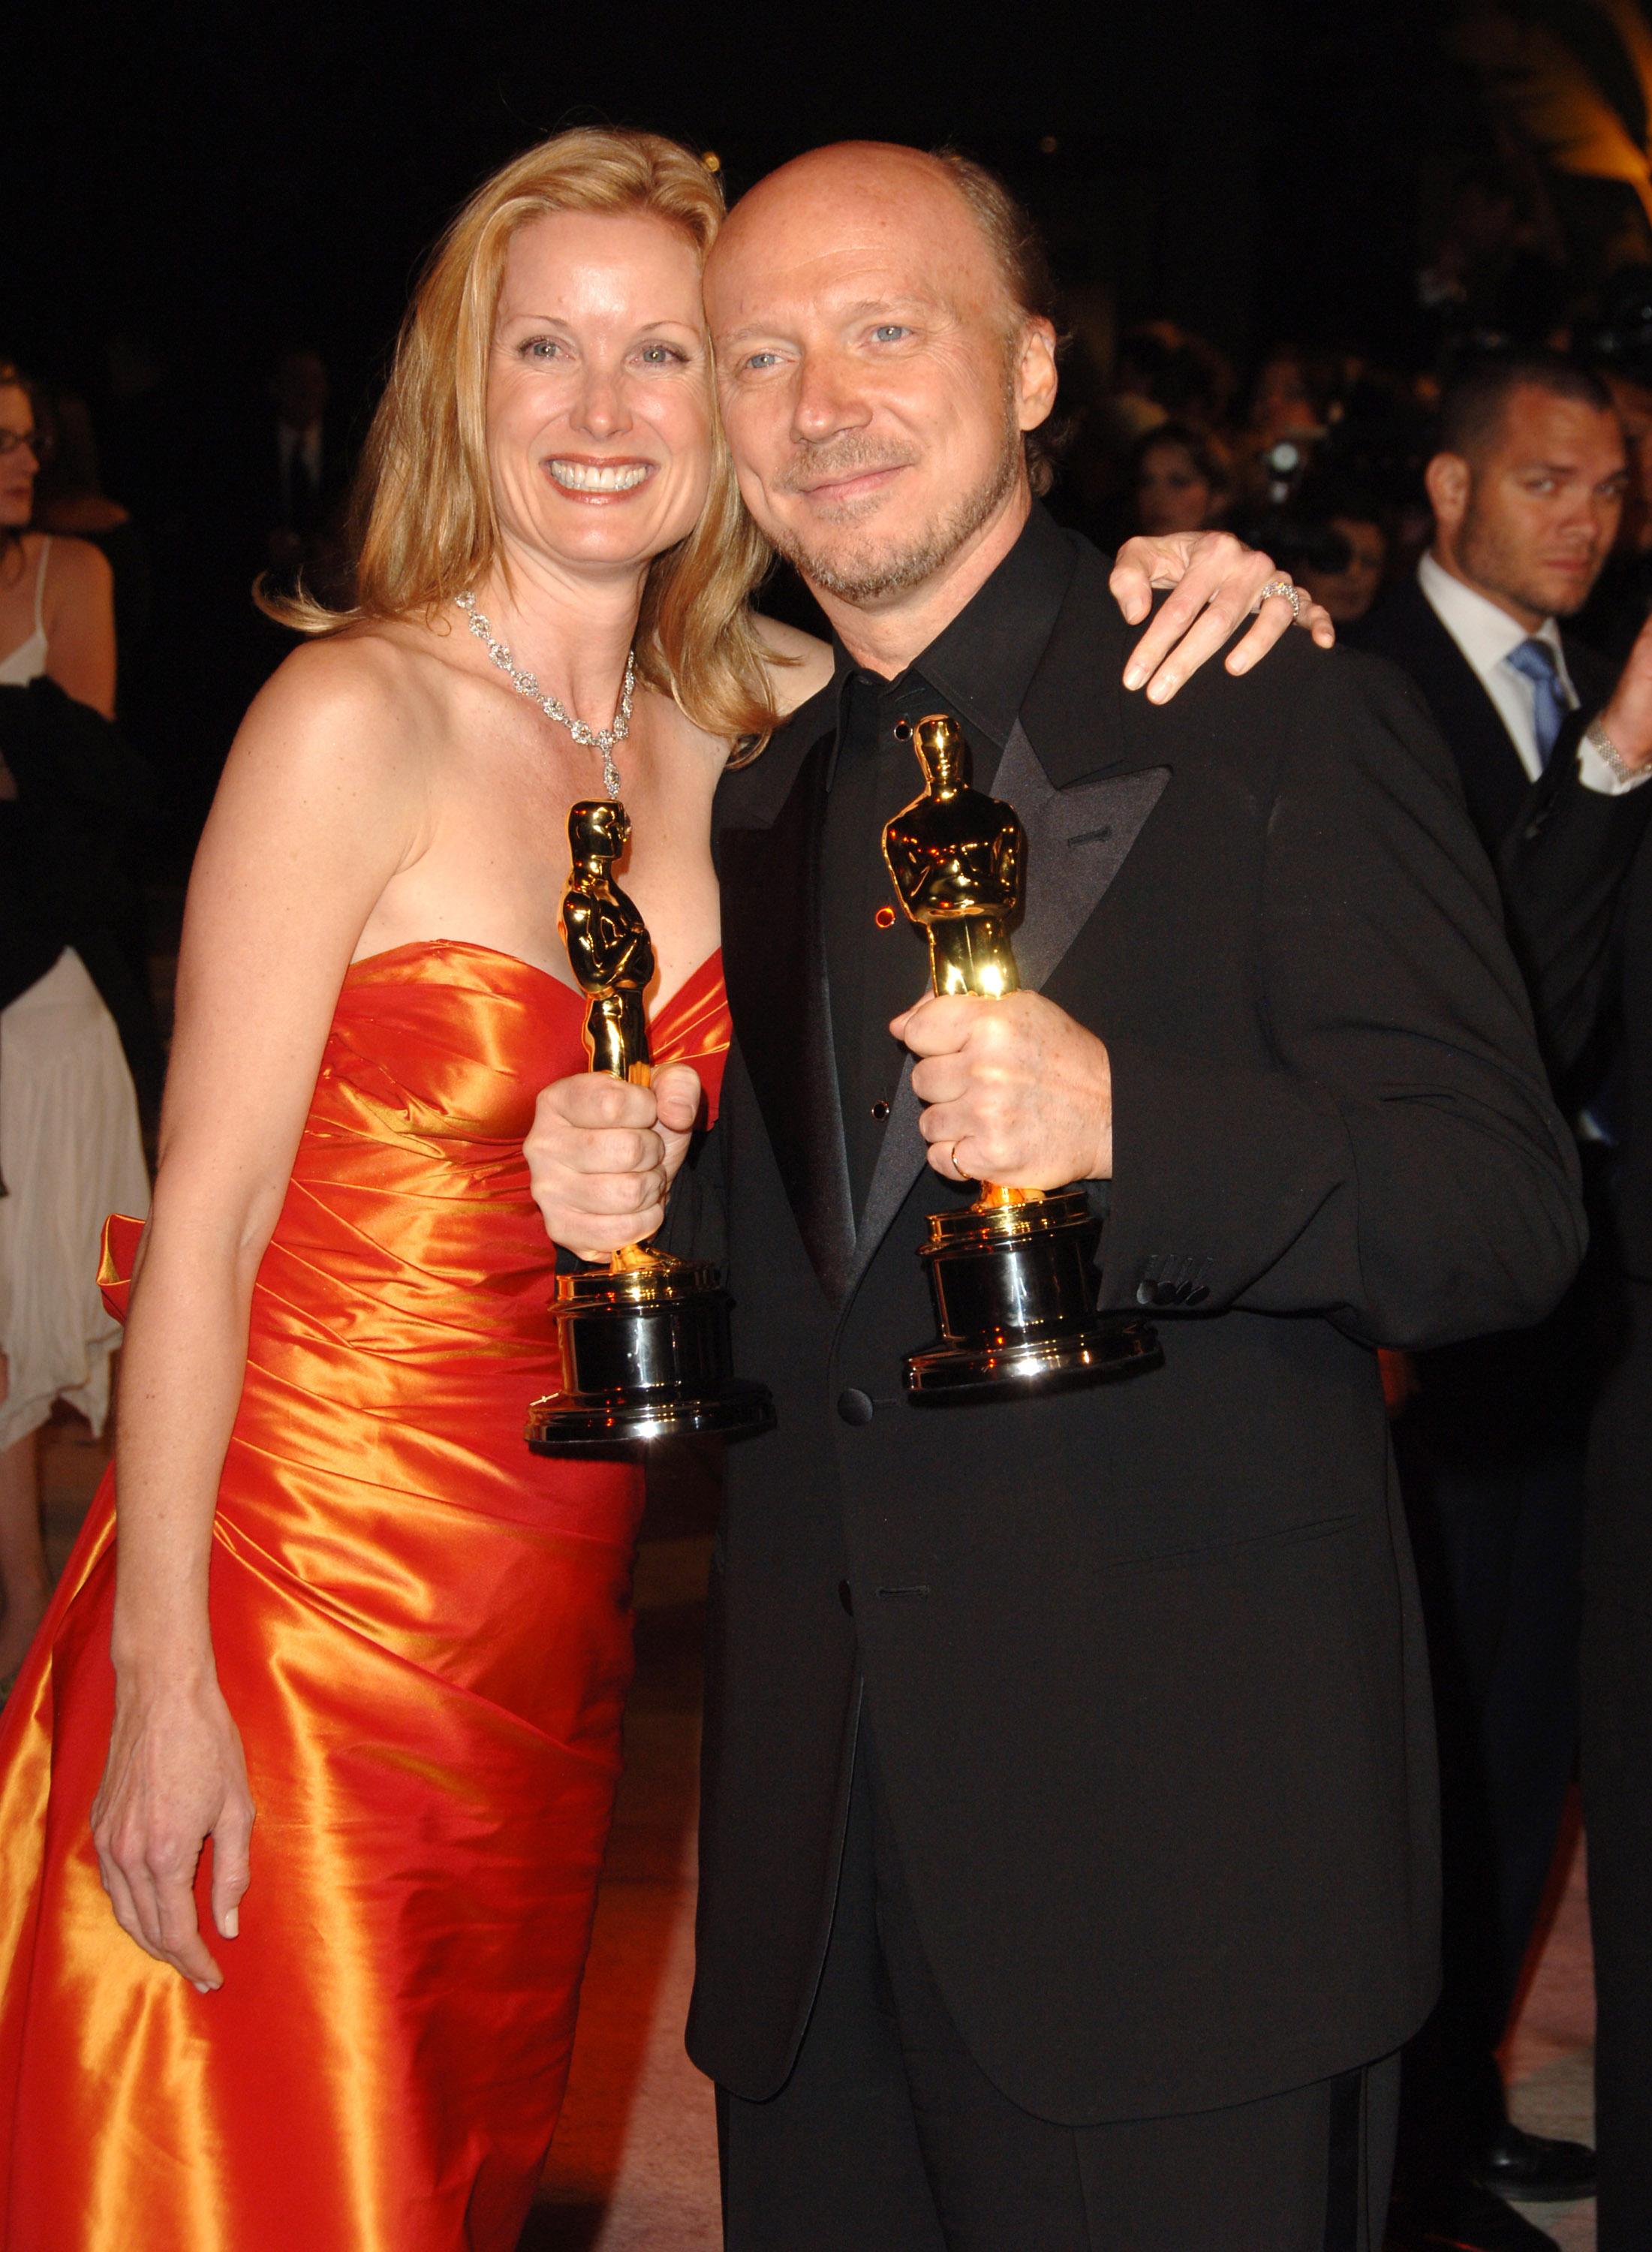 Paul Haggis holding his awards for Best Picture and Best Original Screenplay for "Crash" and Deborah Rennard at the Vanity Fair Oscar Party on March 5, 2006 | Source: Getty Images